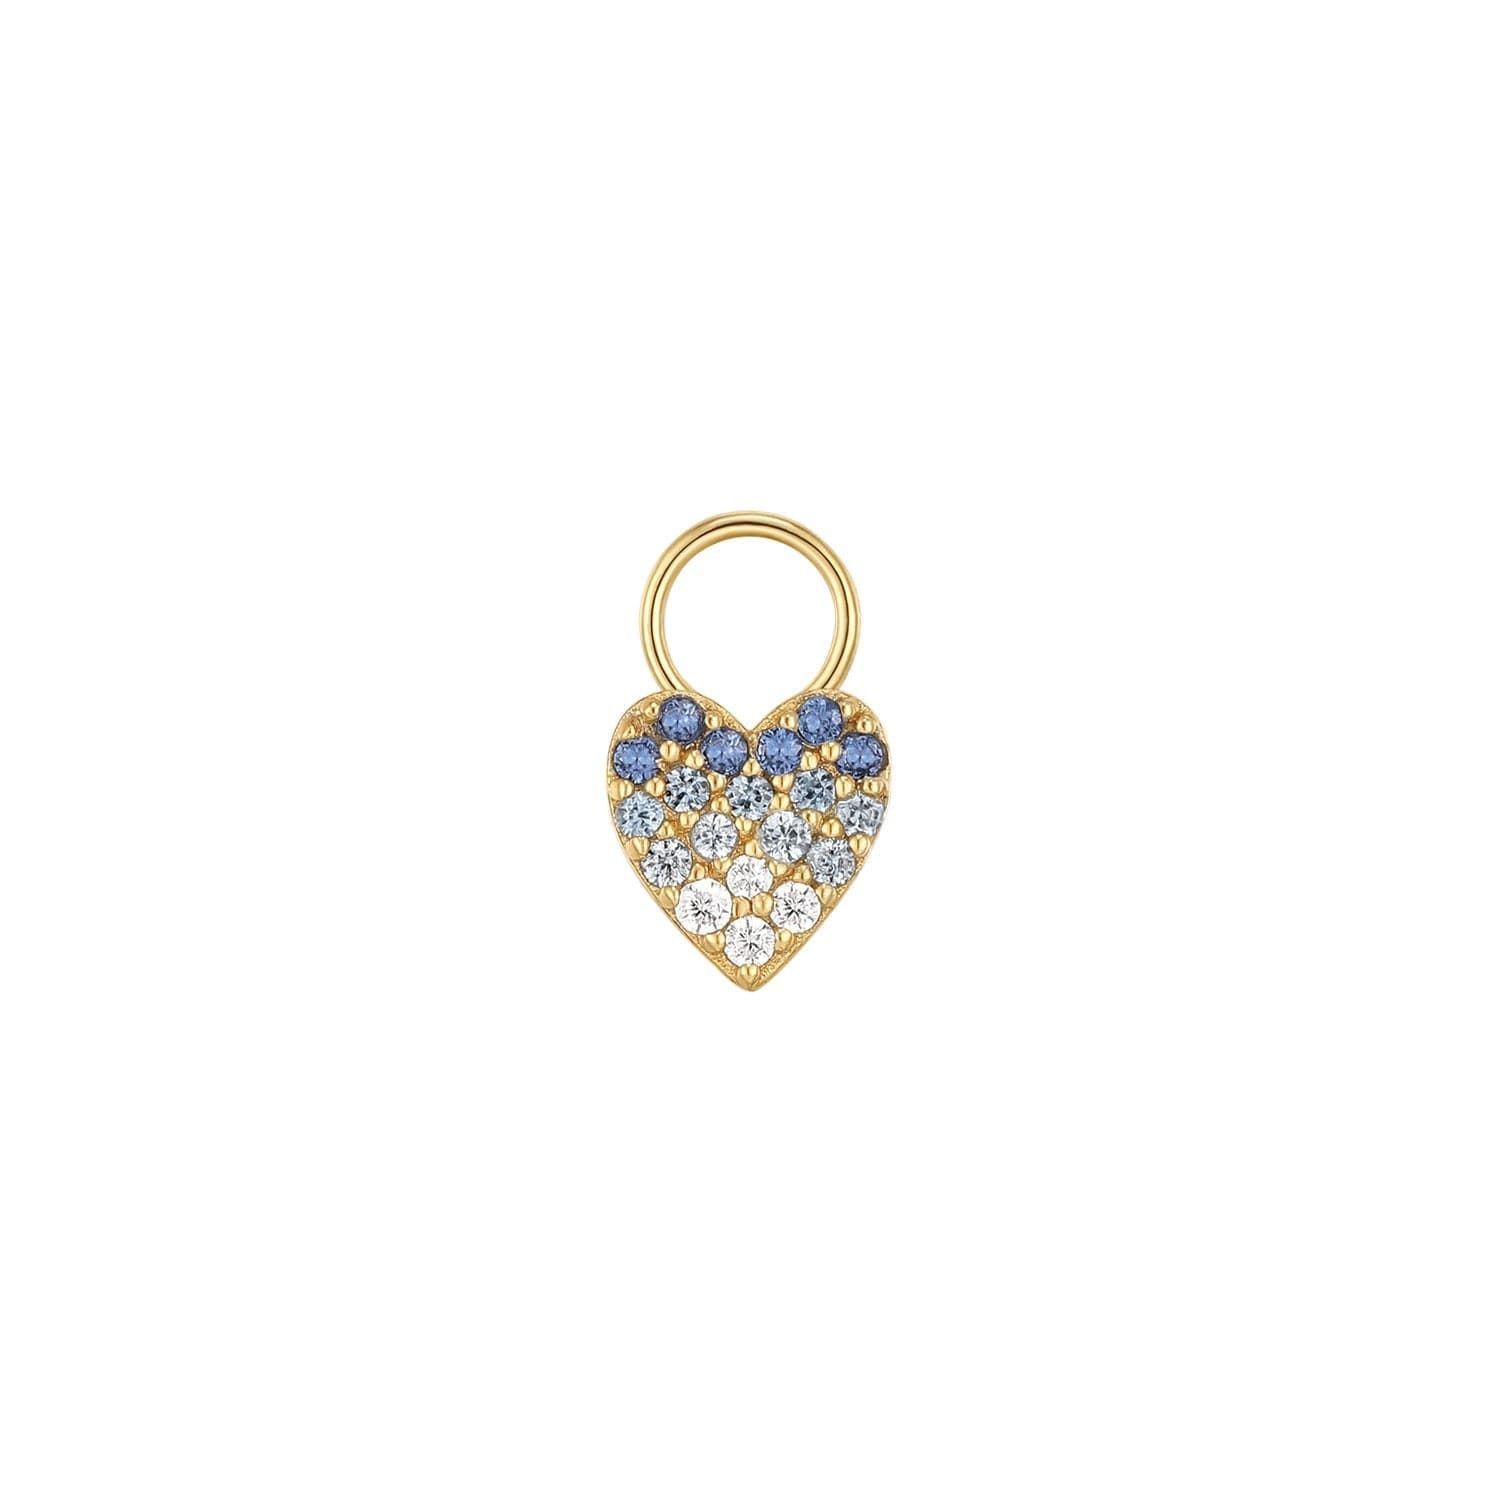 a gold heart shaped ring with blue and white stones